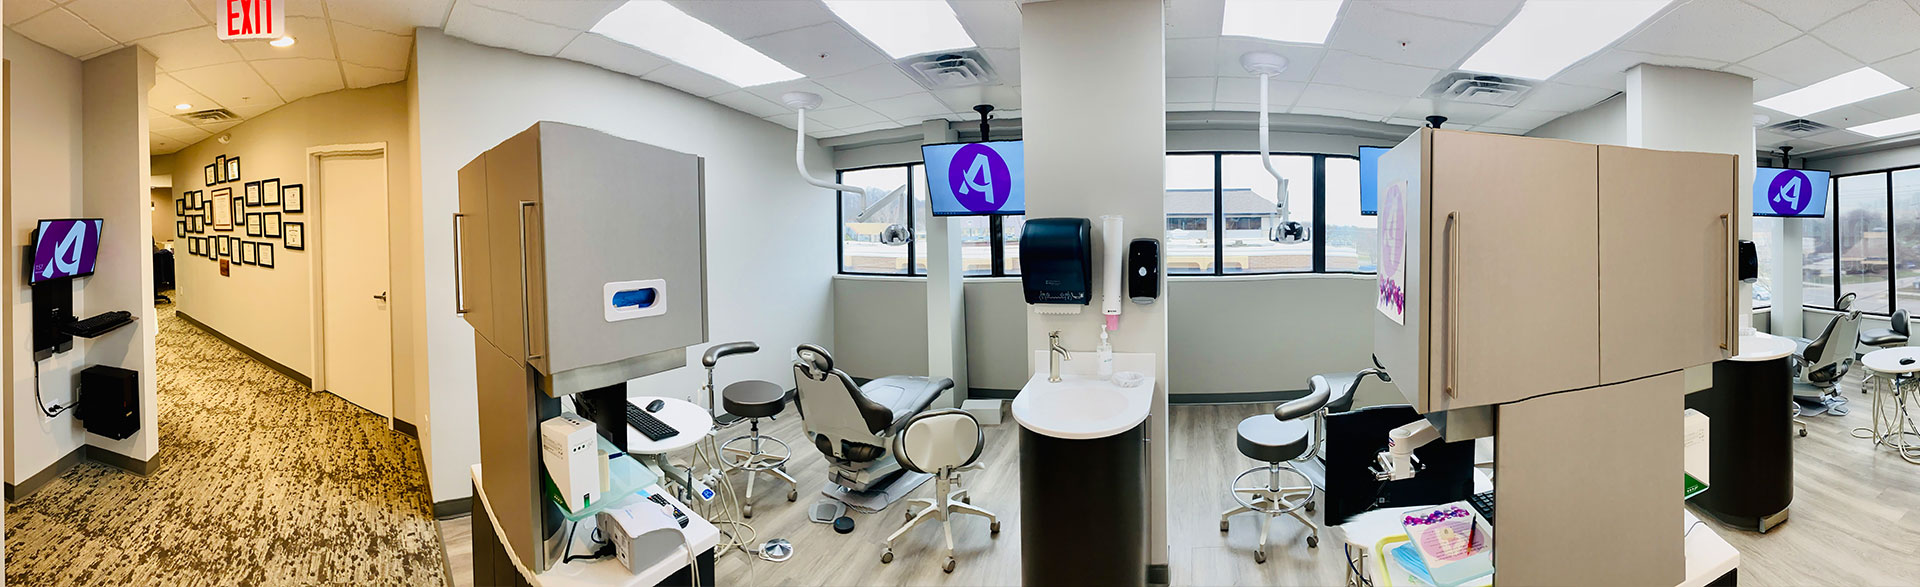 Arsmiles Family and Cosmetic Dentistry inside view